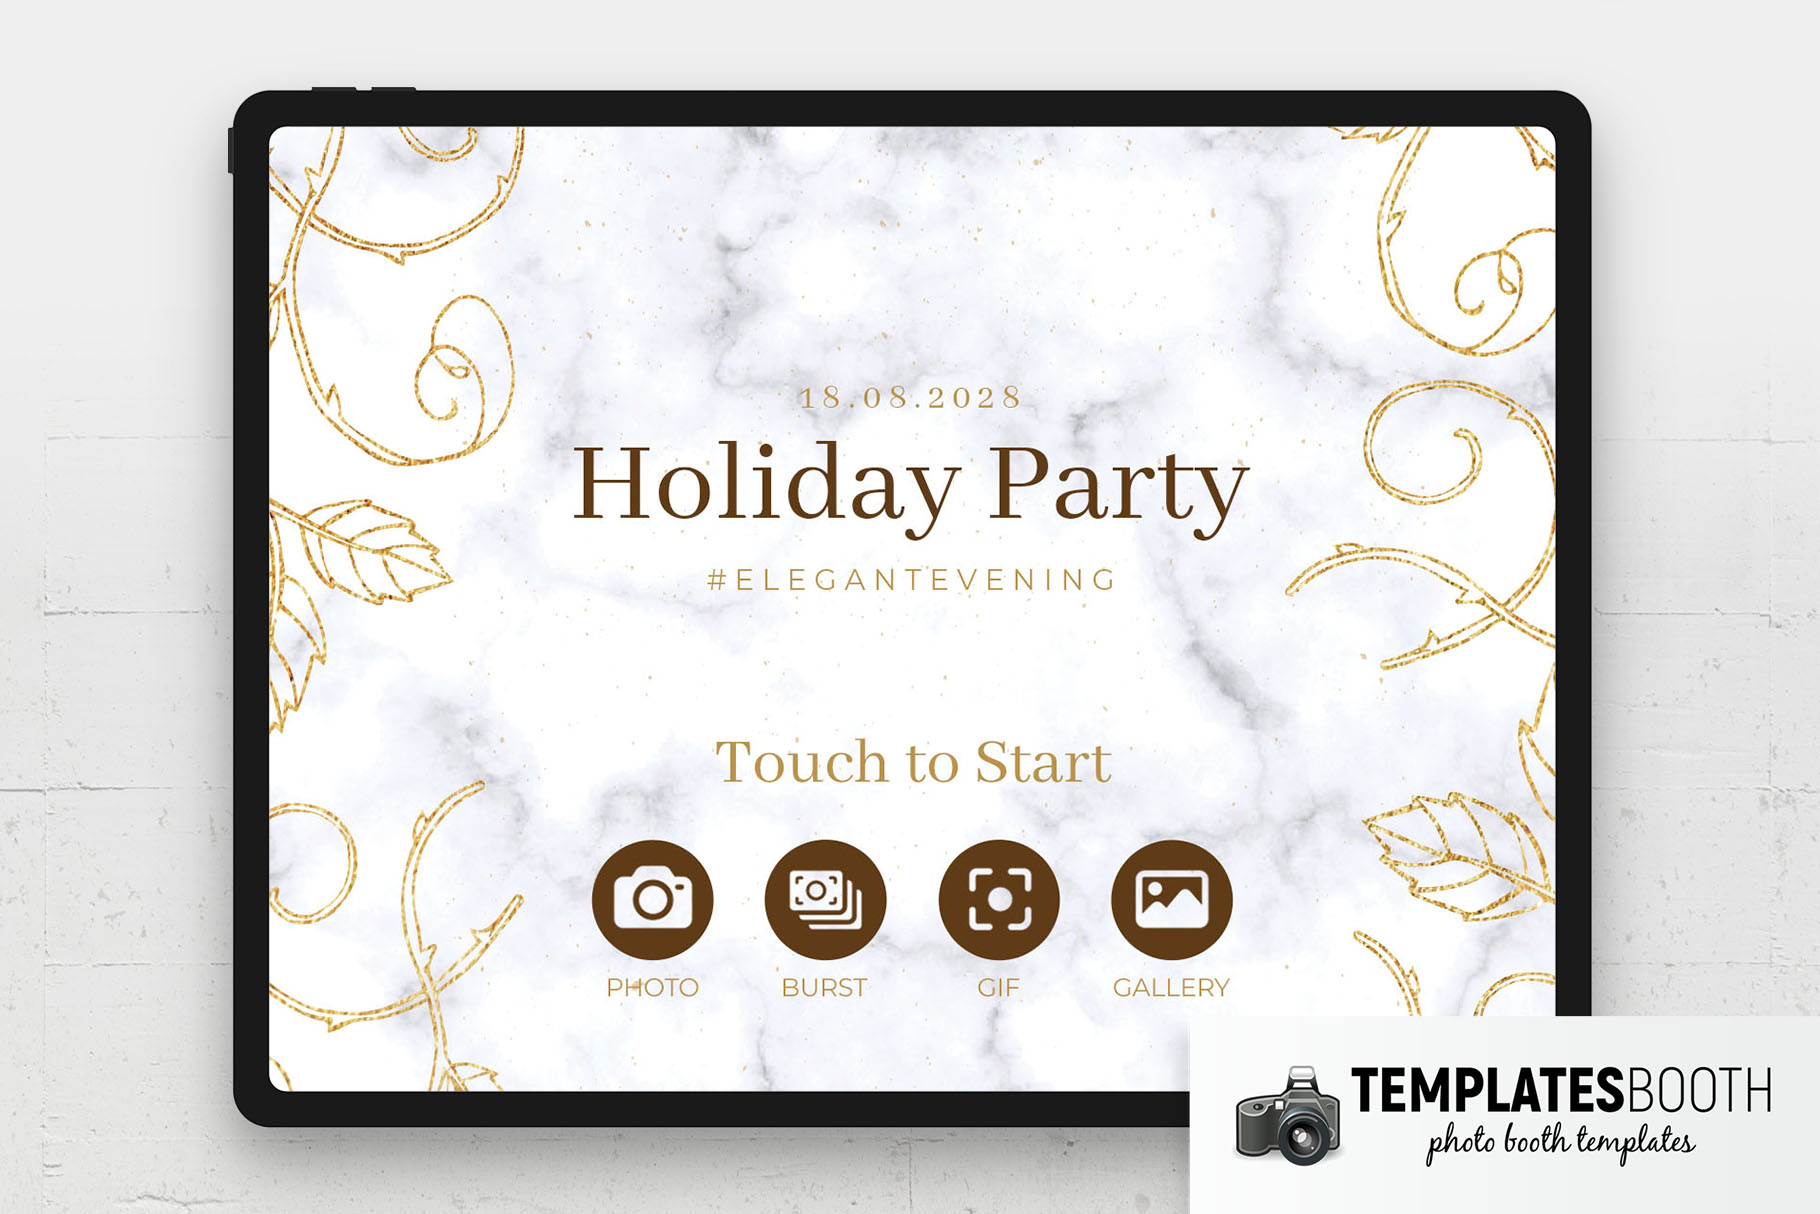 Free Holiday Party Photo Booth Welcome Screen